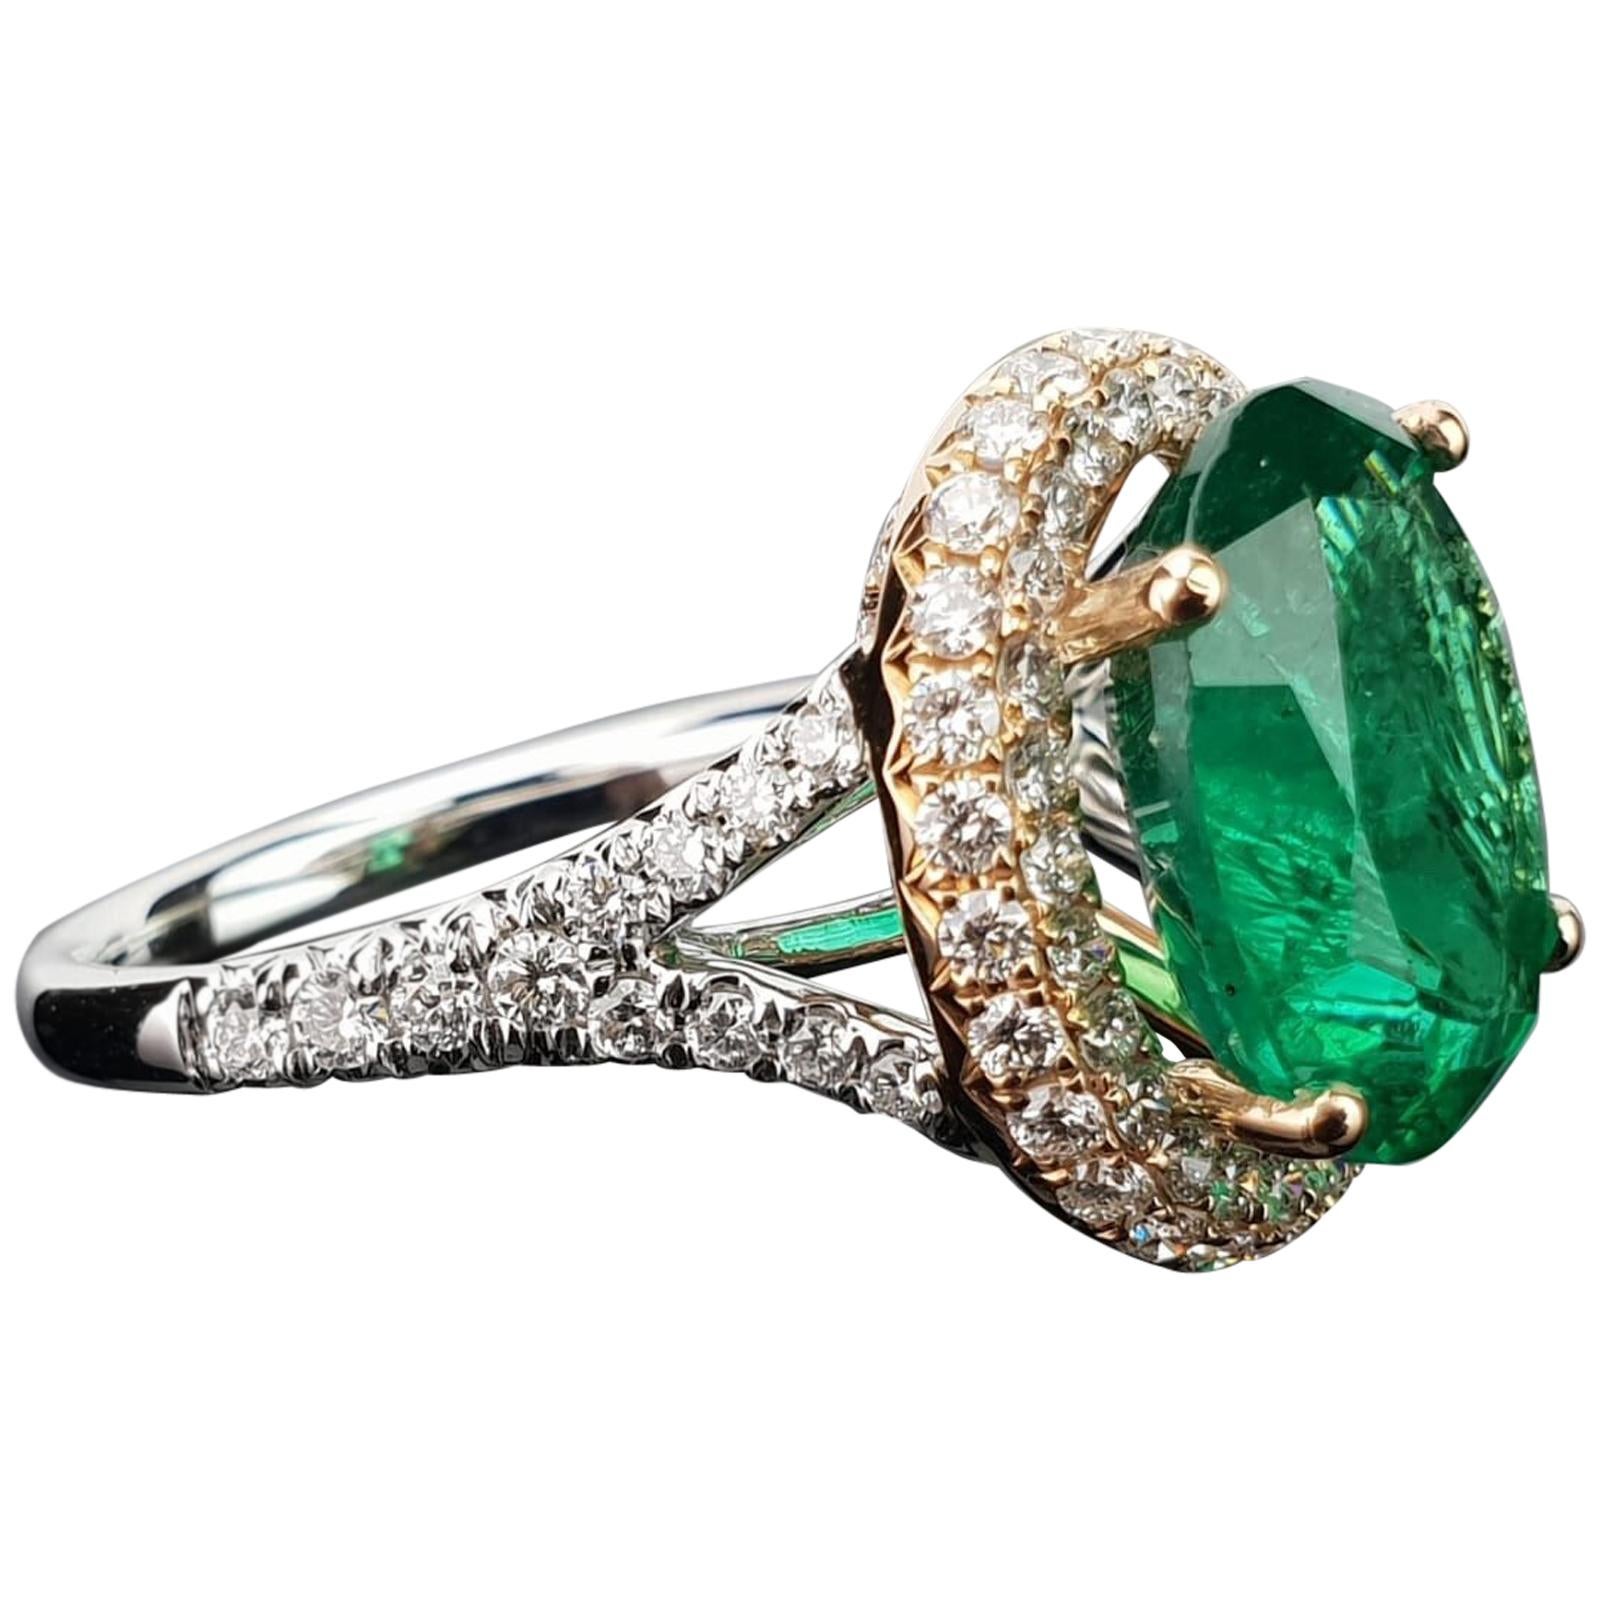 5.46 Carat Emerald and Diamond 18 Karat White and Rose Gold Cocktail Ring For Sale